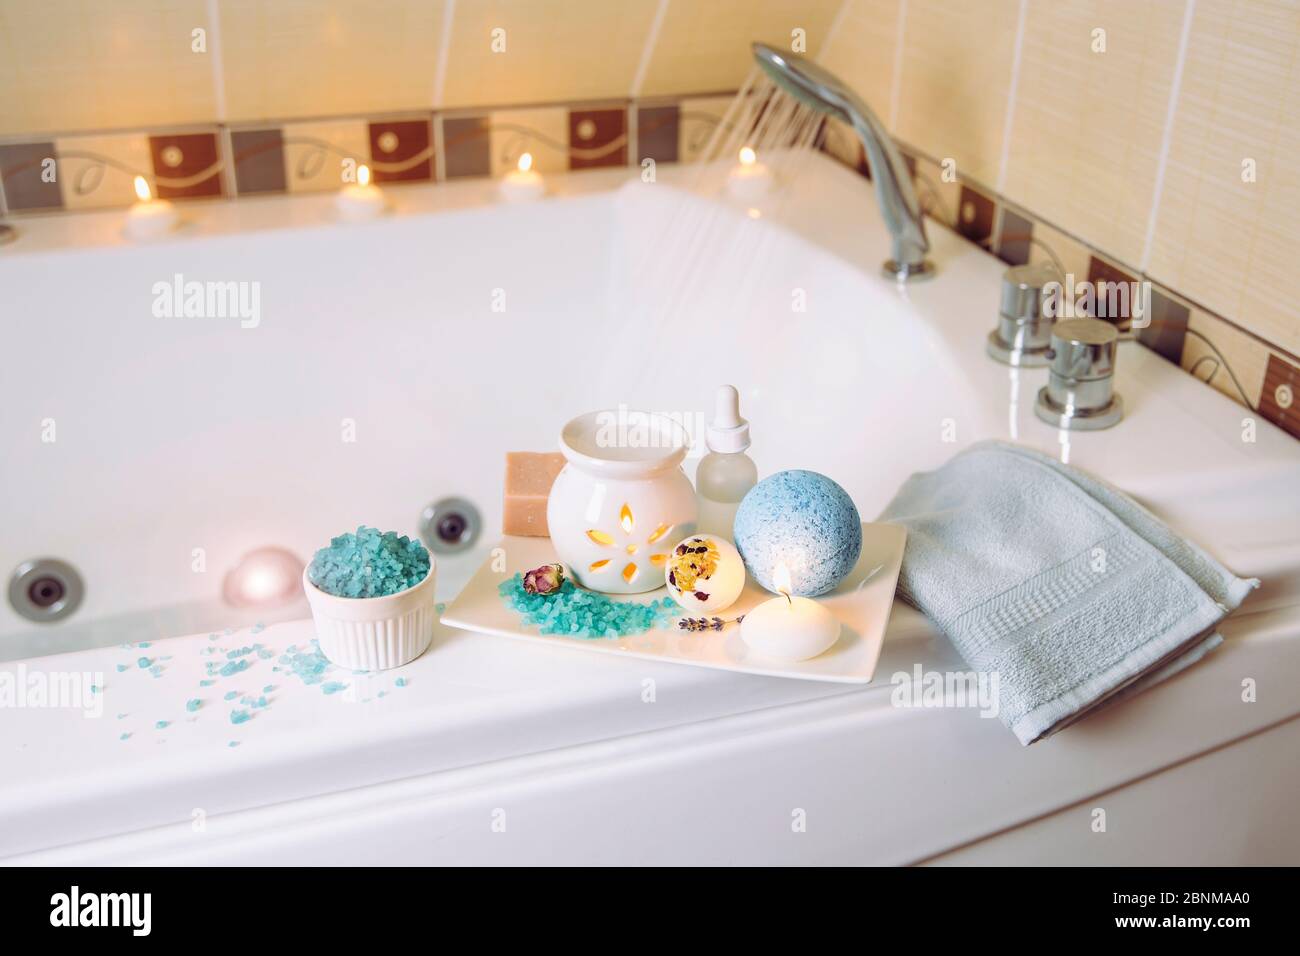 Indoors home spa toiletries on tray in bath room on bath. Ready to spend relaxing alone self time. Blue bath salt bomb and towel. Stock Photo